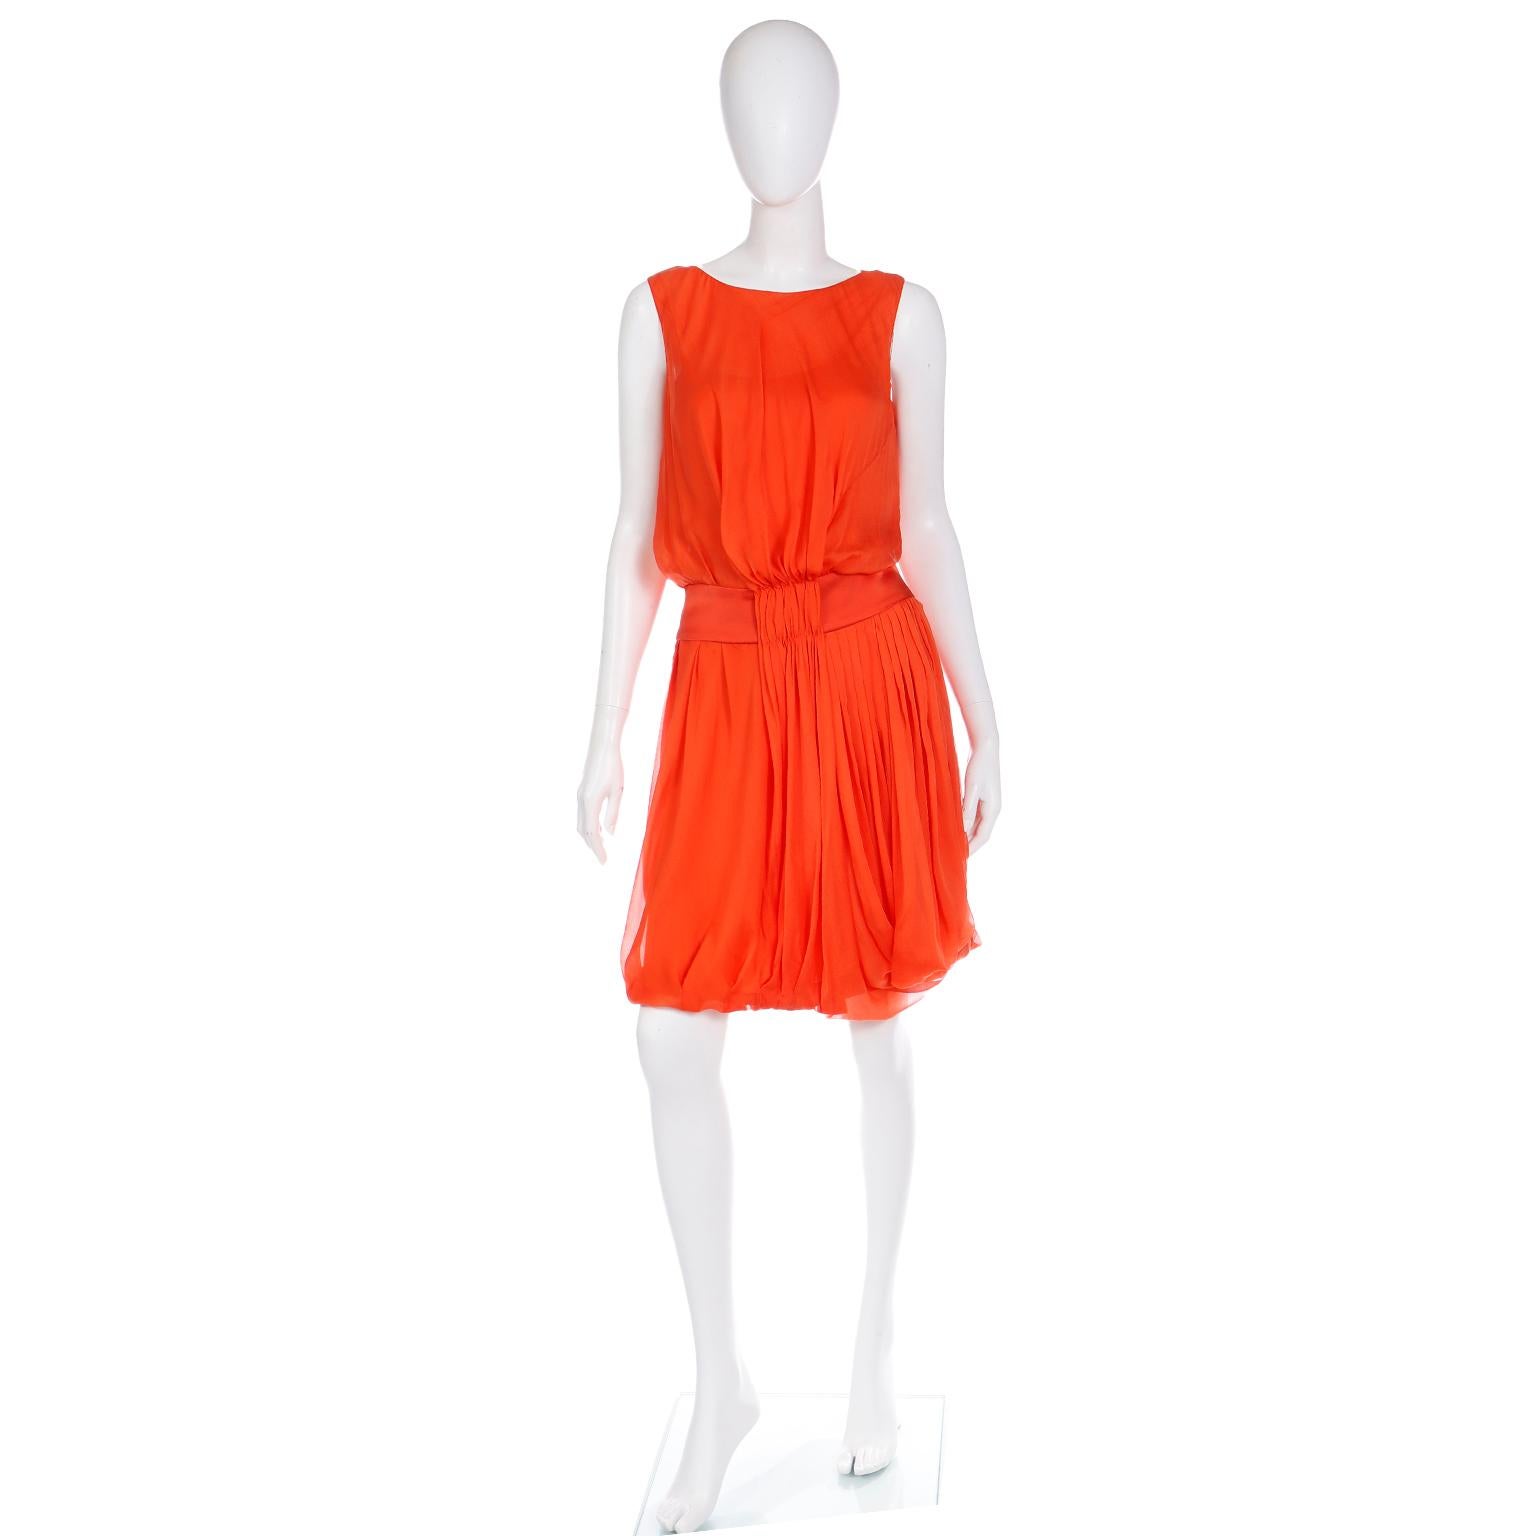 This early 2000s vintage dress came from an Italian estate of designer clothing. Reminiscent of Alberta Ferretti, this unlabeled fine silk chiffon dress is in a beautiful shade of orange and it has a silk satin waistband. We love the blousy fit of